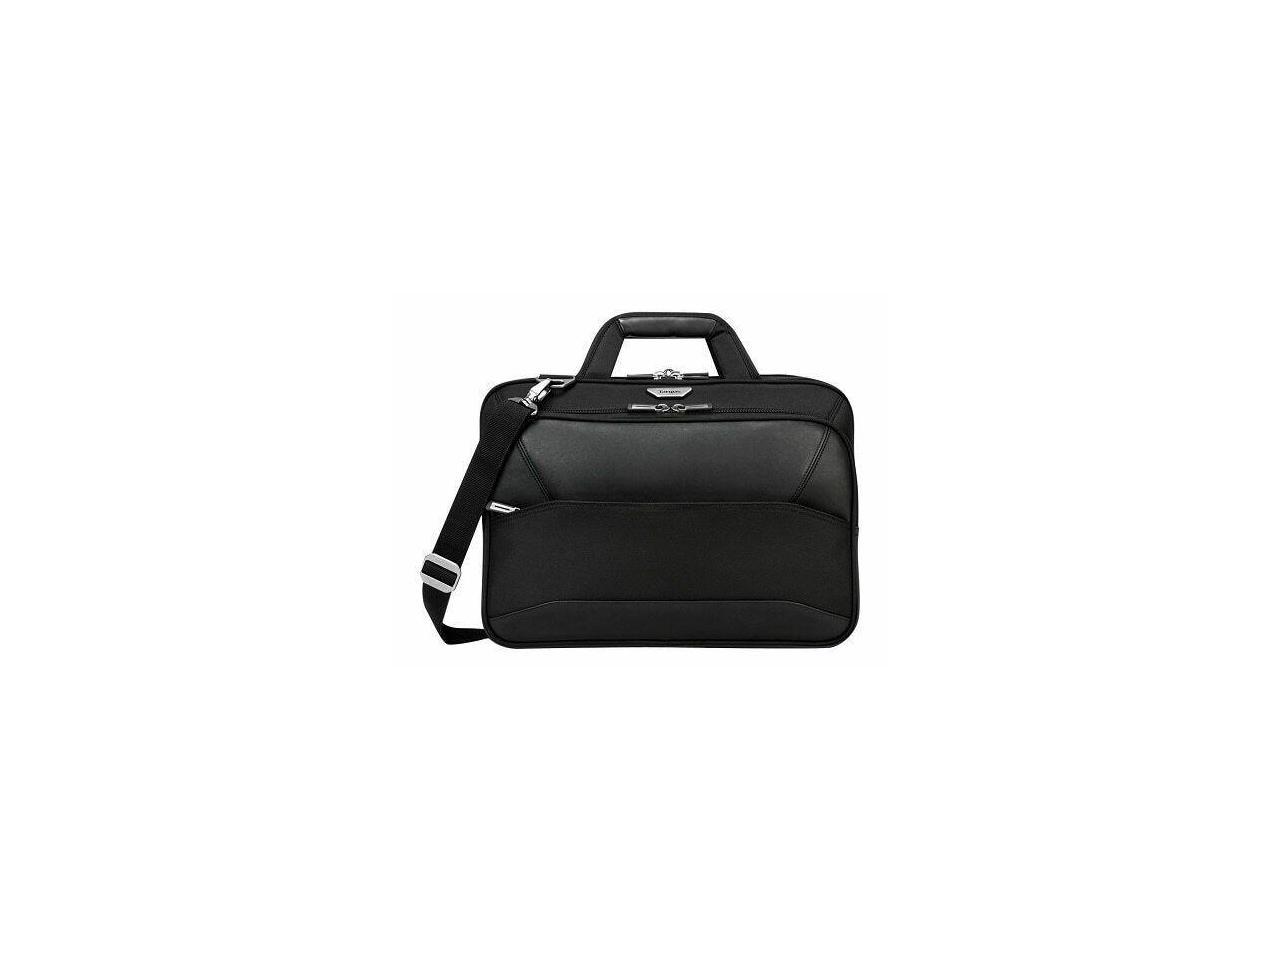 Targus Mobile Vip Pbt264 Carrying Case For 15.6" Notebook - Black